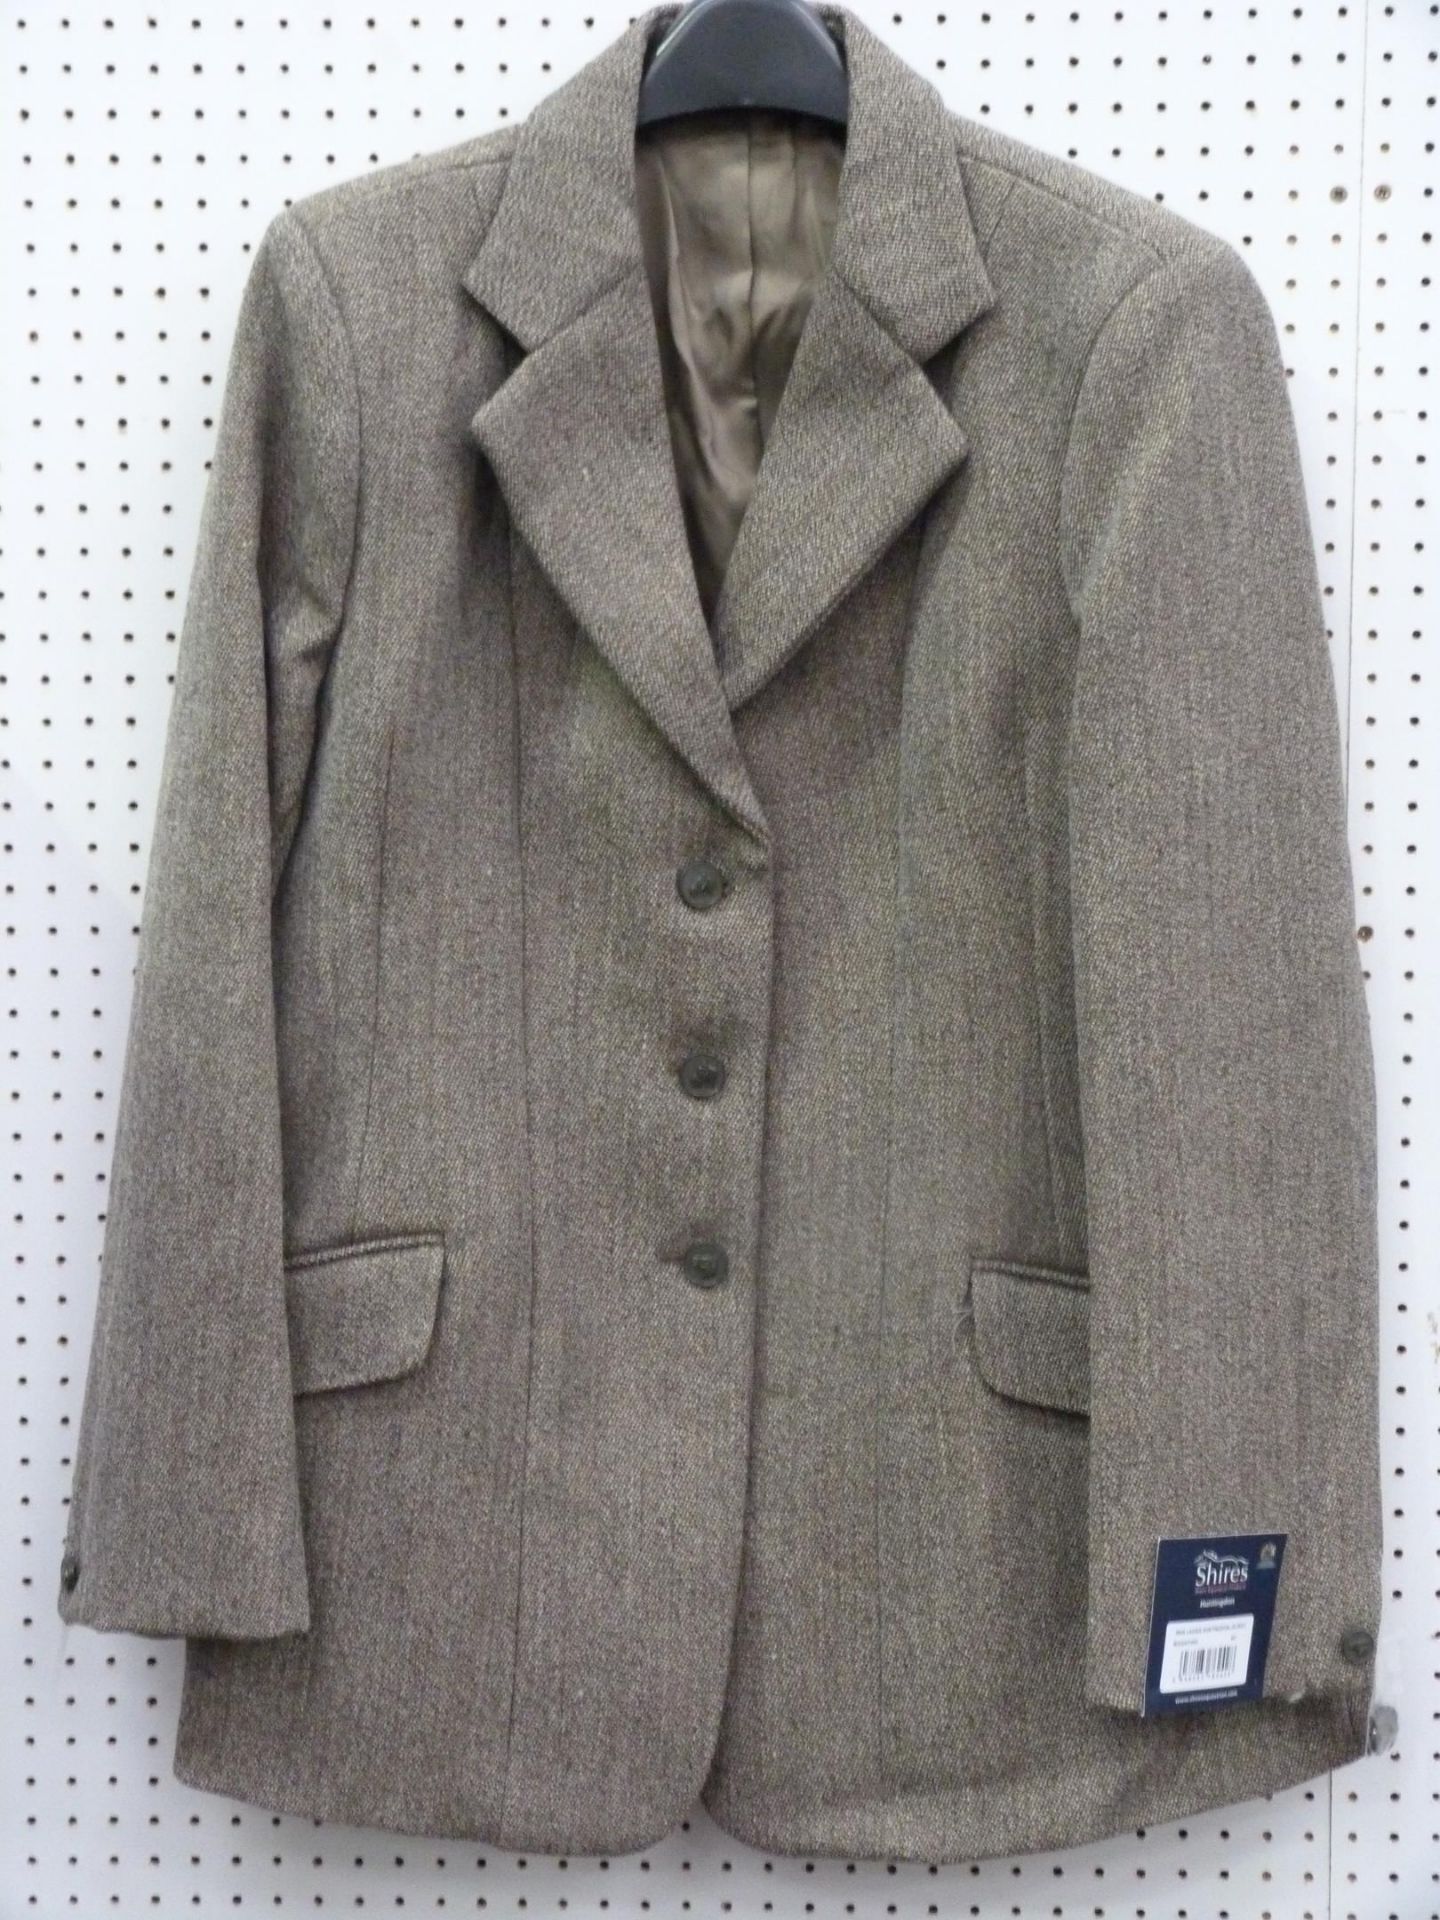 * Two New Ladies Shires Tweed Jackets. One Huntingdon Jacket size 40'', the other a Malvern Tweed - Image 5 of 7